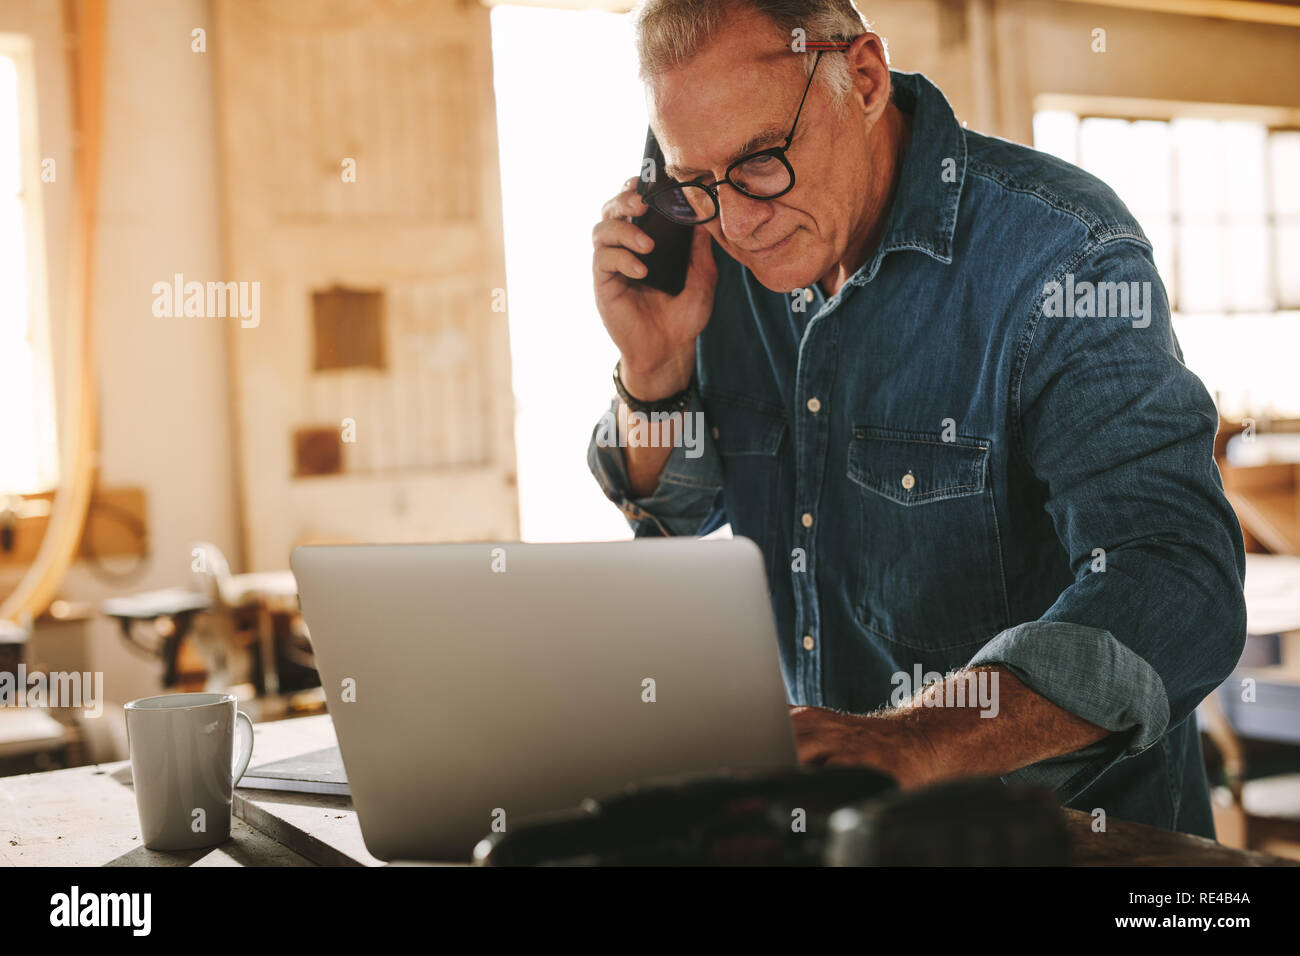 Mature man looking busy using laptop and talking on mobile phone in his workshop. Senior male carpenter working on laptop and phone call in his carpen Stock Photo